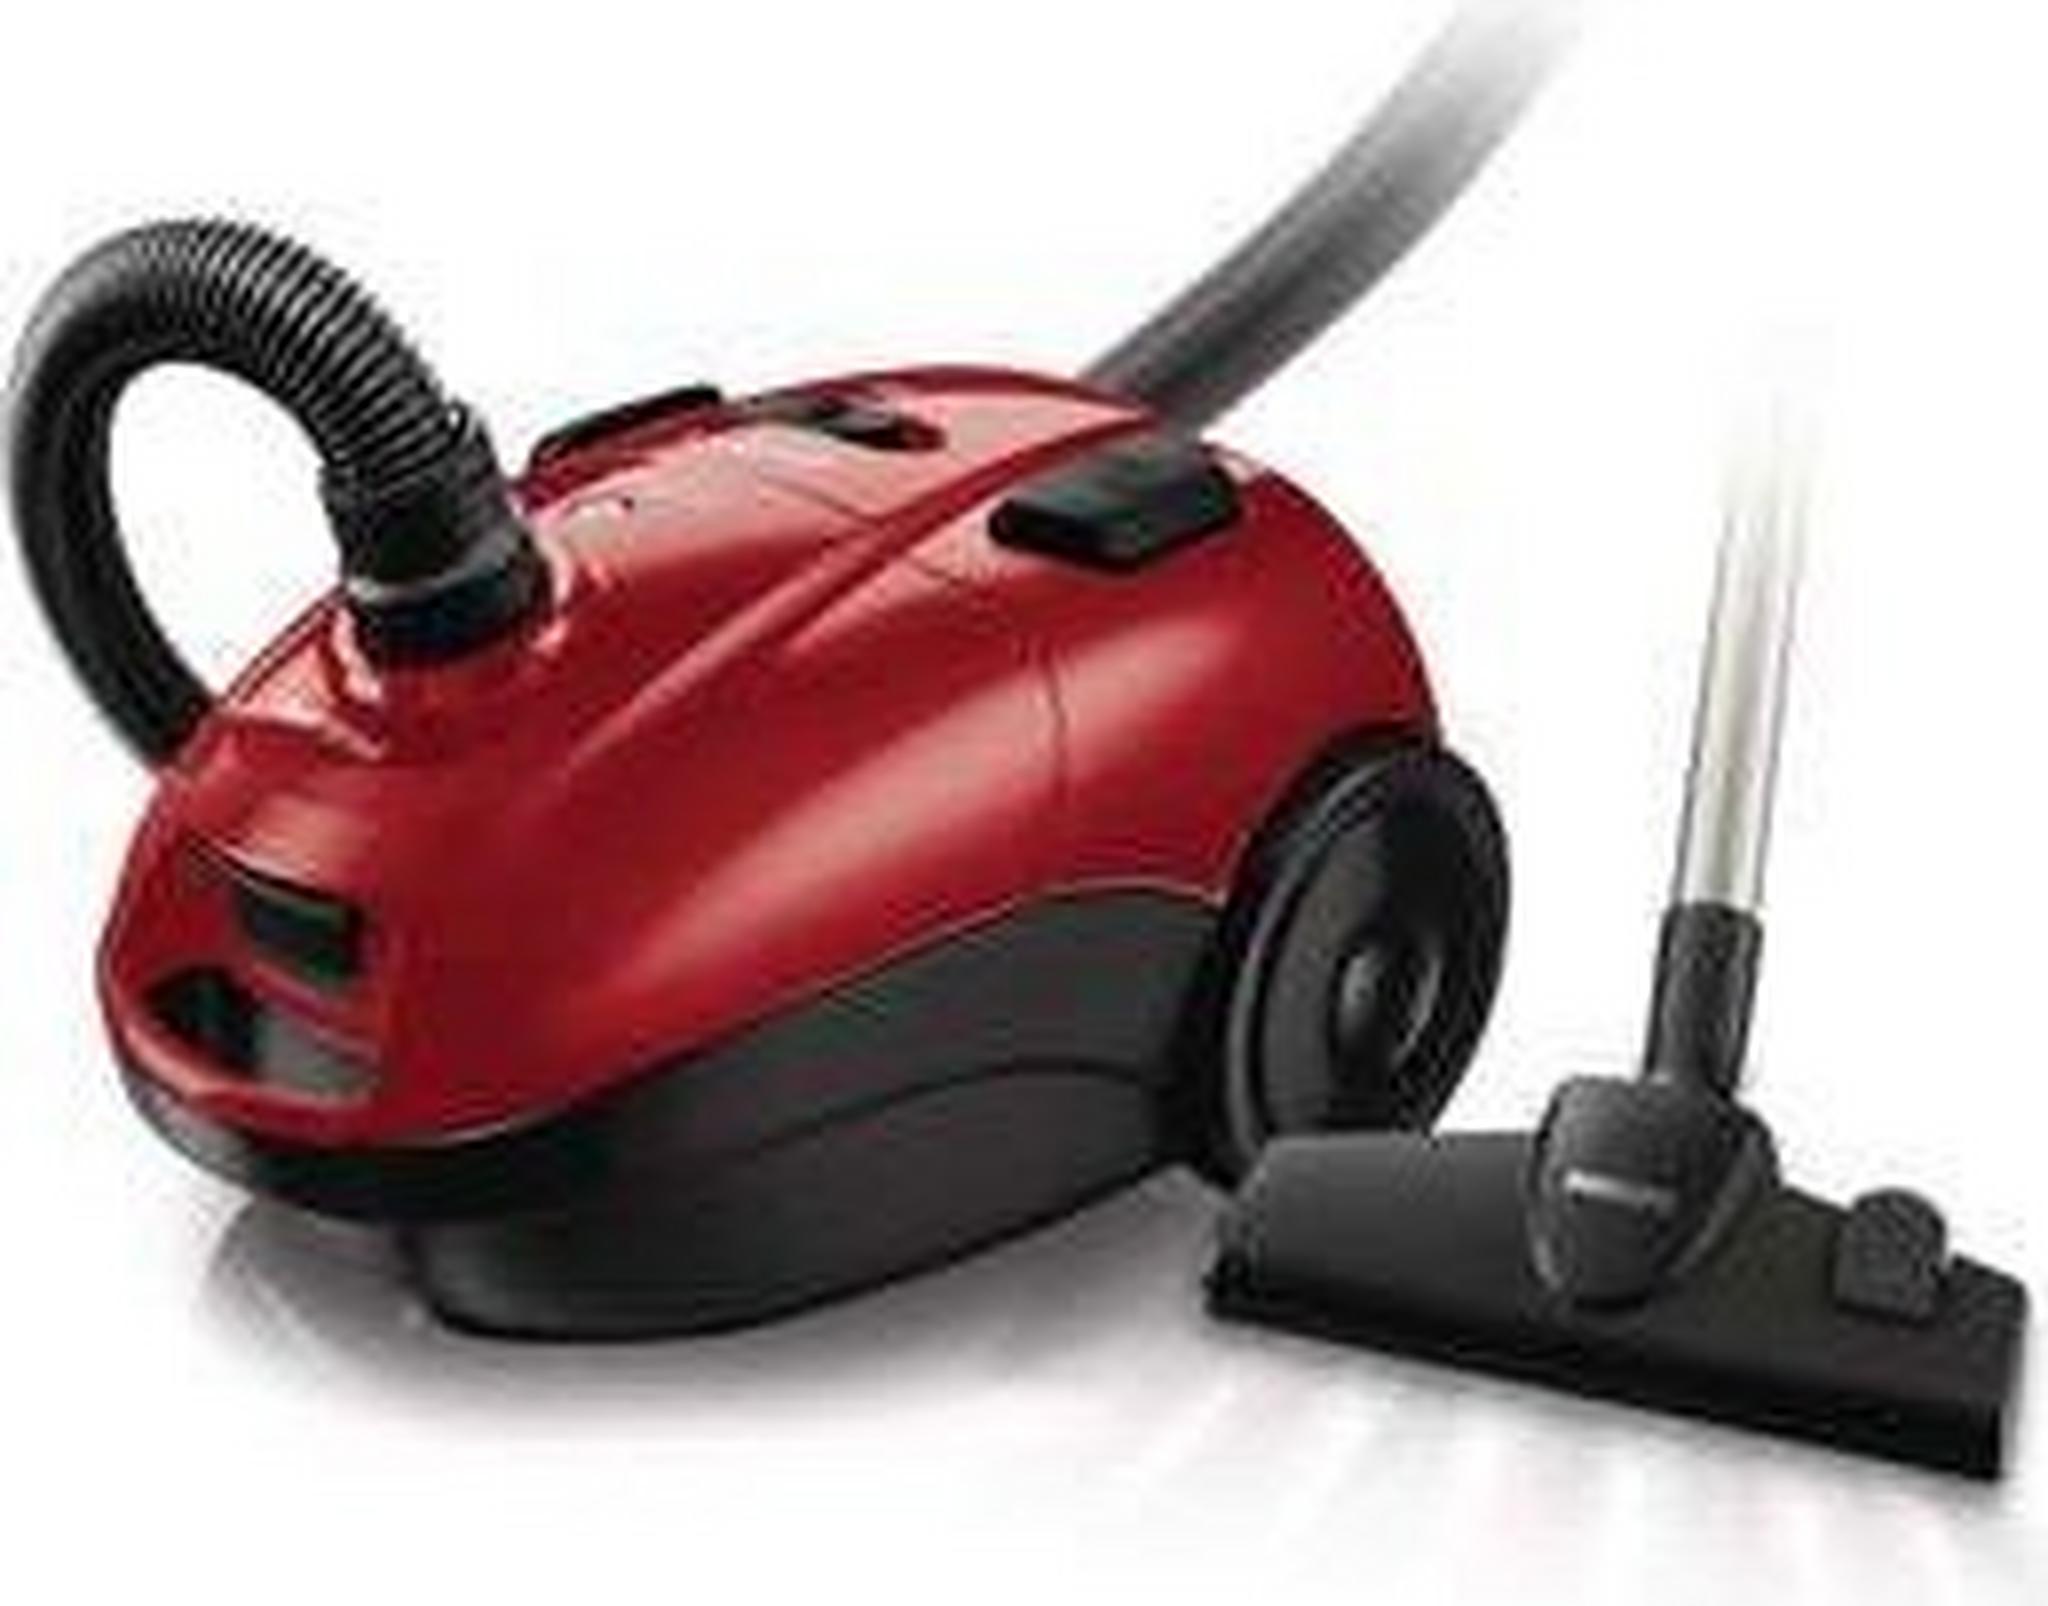 Philips FC8451/61 Powerlife Vacuum Cleaner with Bag - 1900W